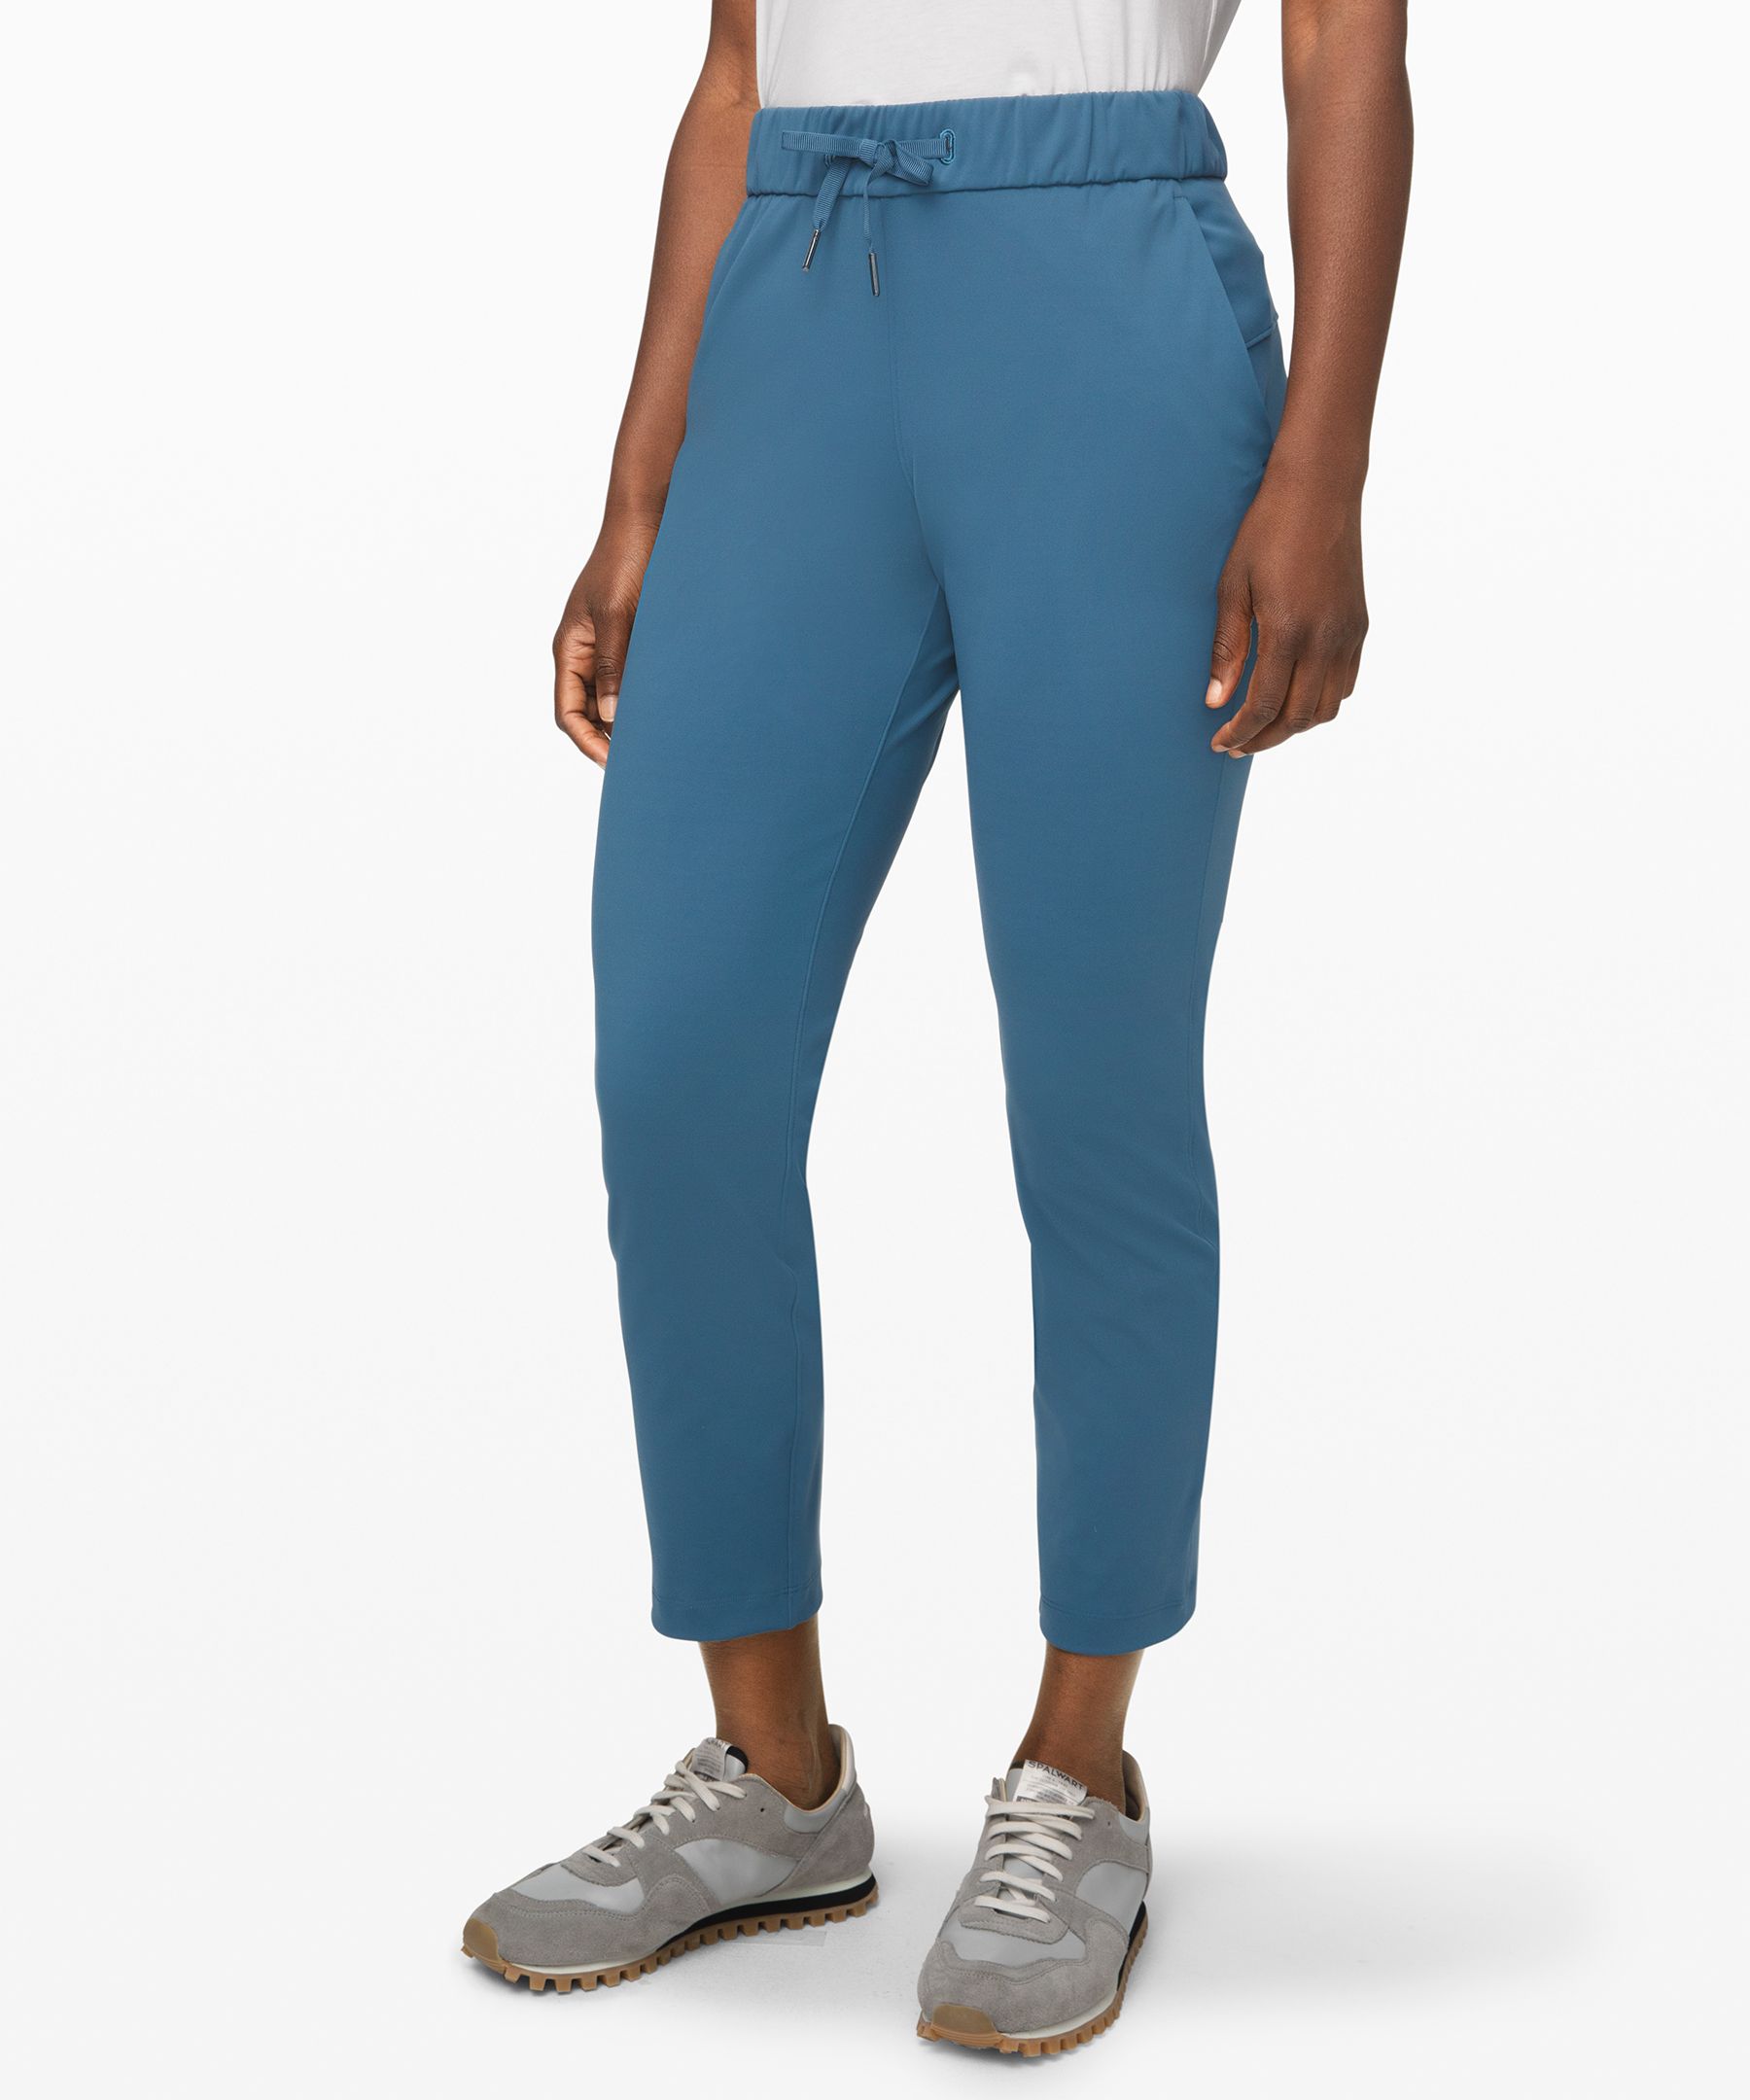 Lululemon On The Fly 7/8 Pant In Silverscreen